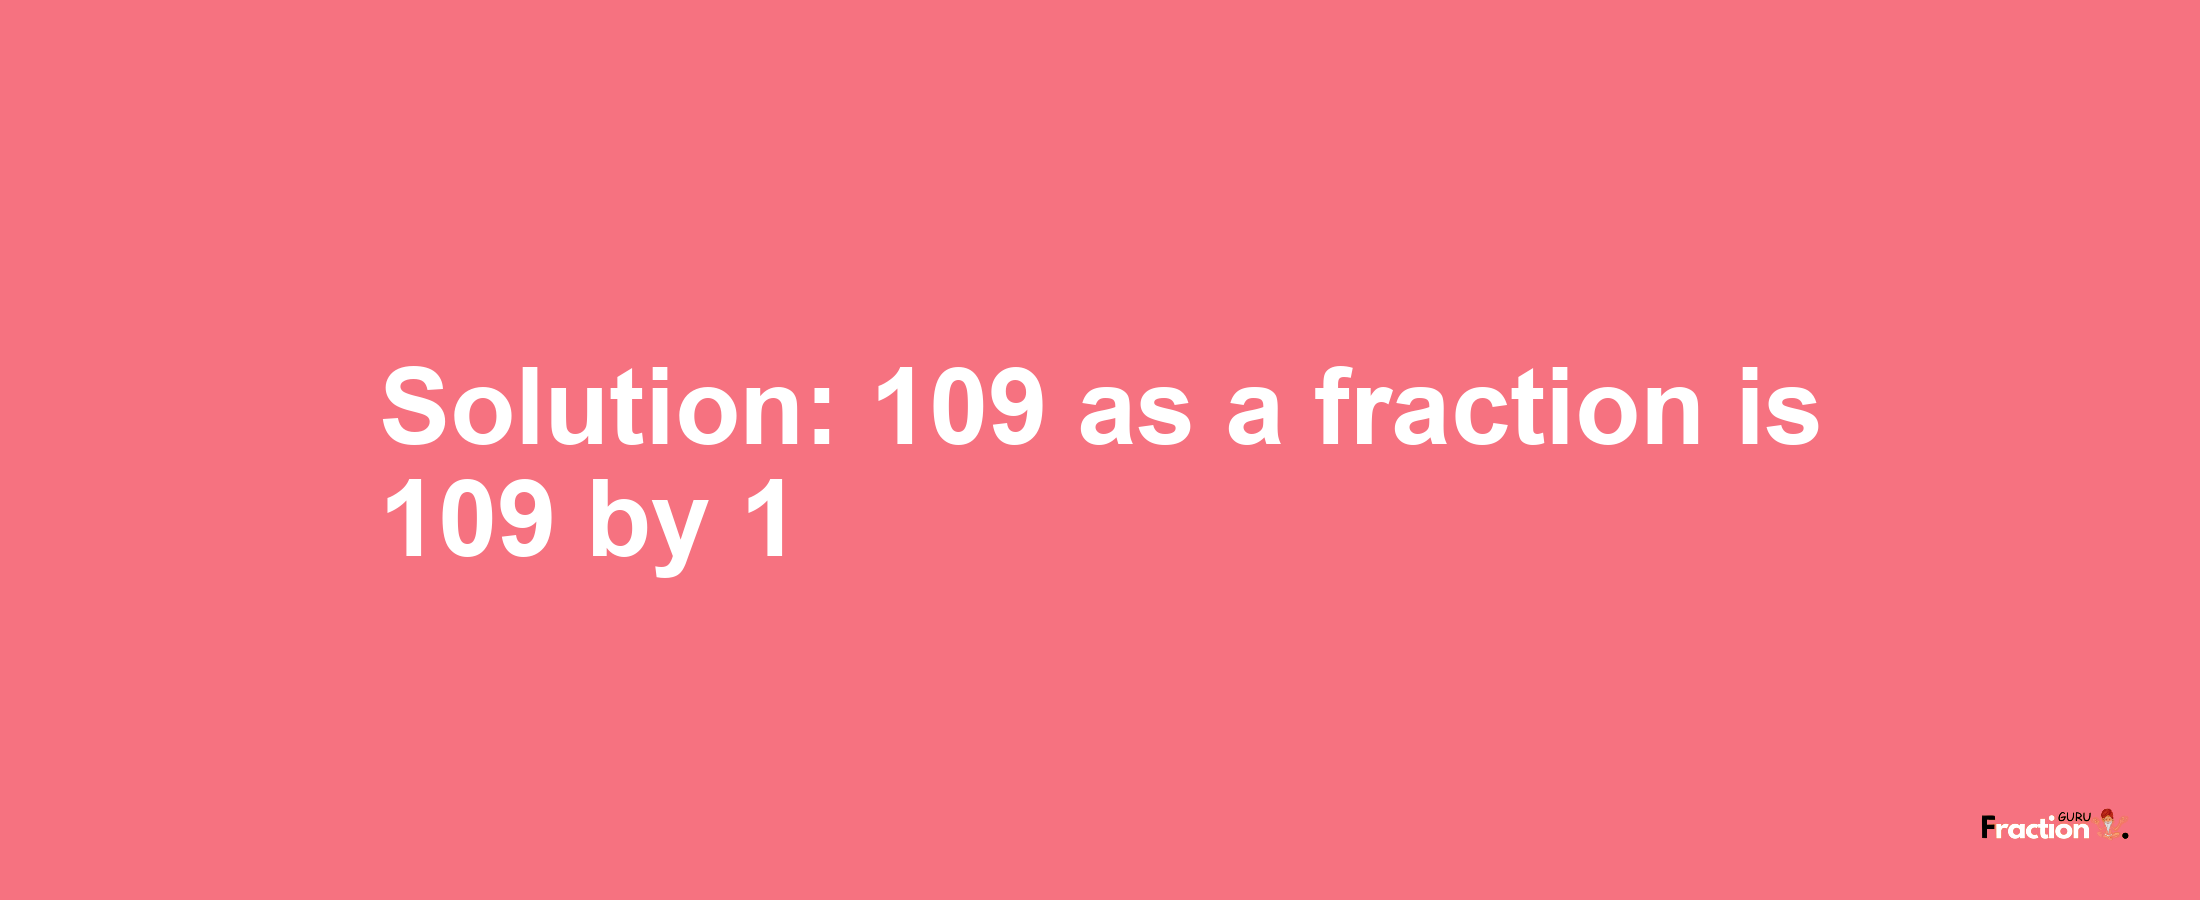 Solution:109 as a fraction is 109/1